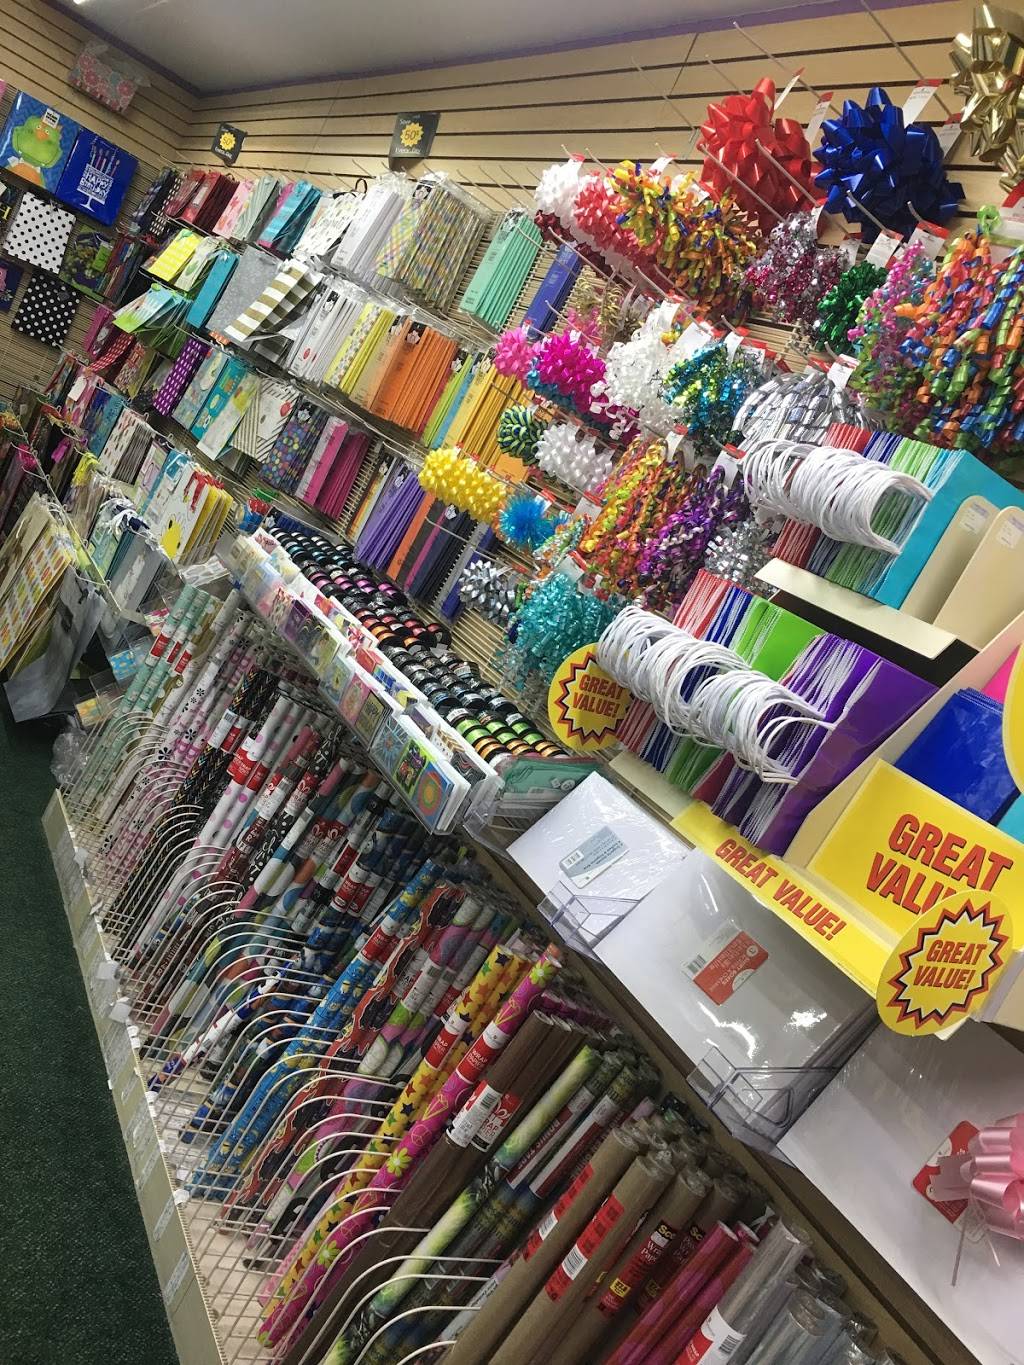 Cards And Gifts 50% Off. | 262 Arden Ave, Staten Island, NY 10312 | Phone: (718) 317-1800